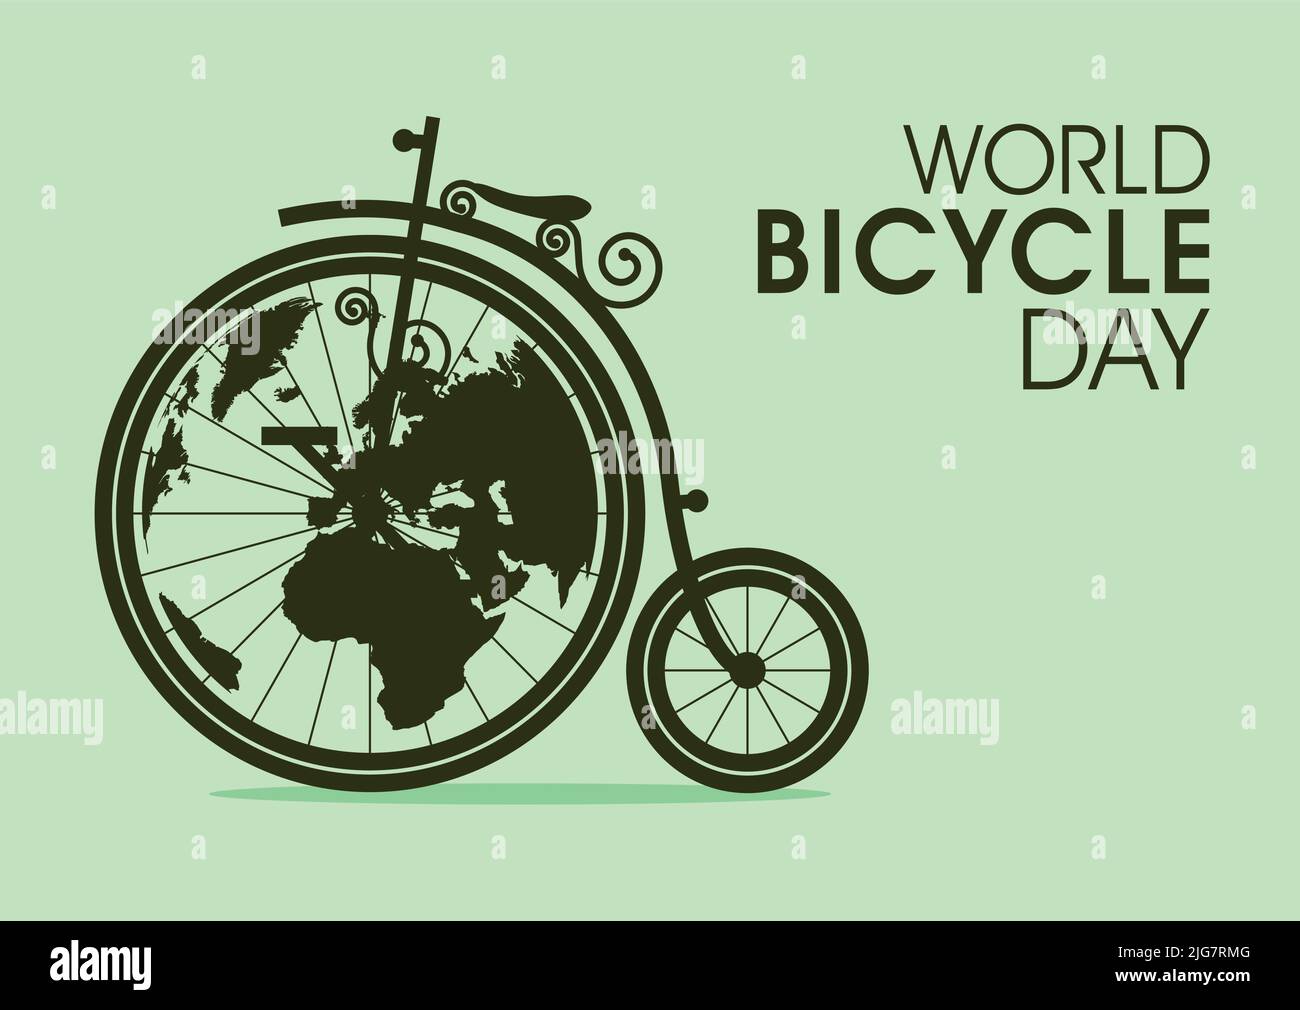 vintage bicycle and globe images Stock Vector